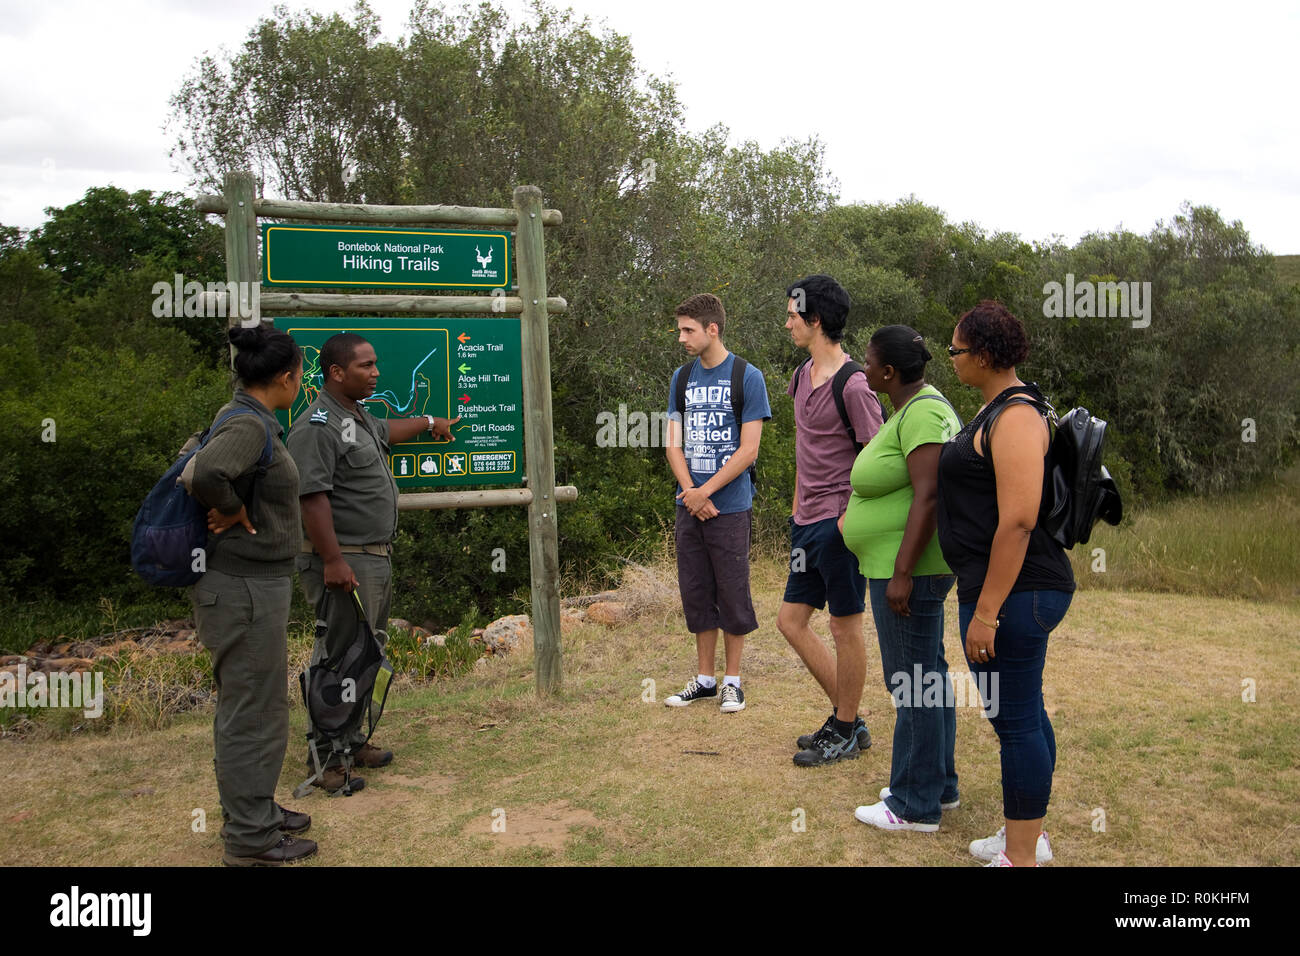 Hikers and rangers looking at sign for Bontebok National Park Stock Photo